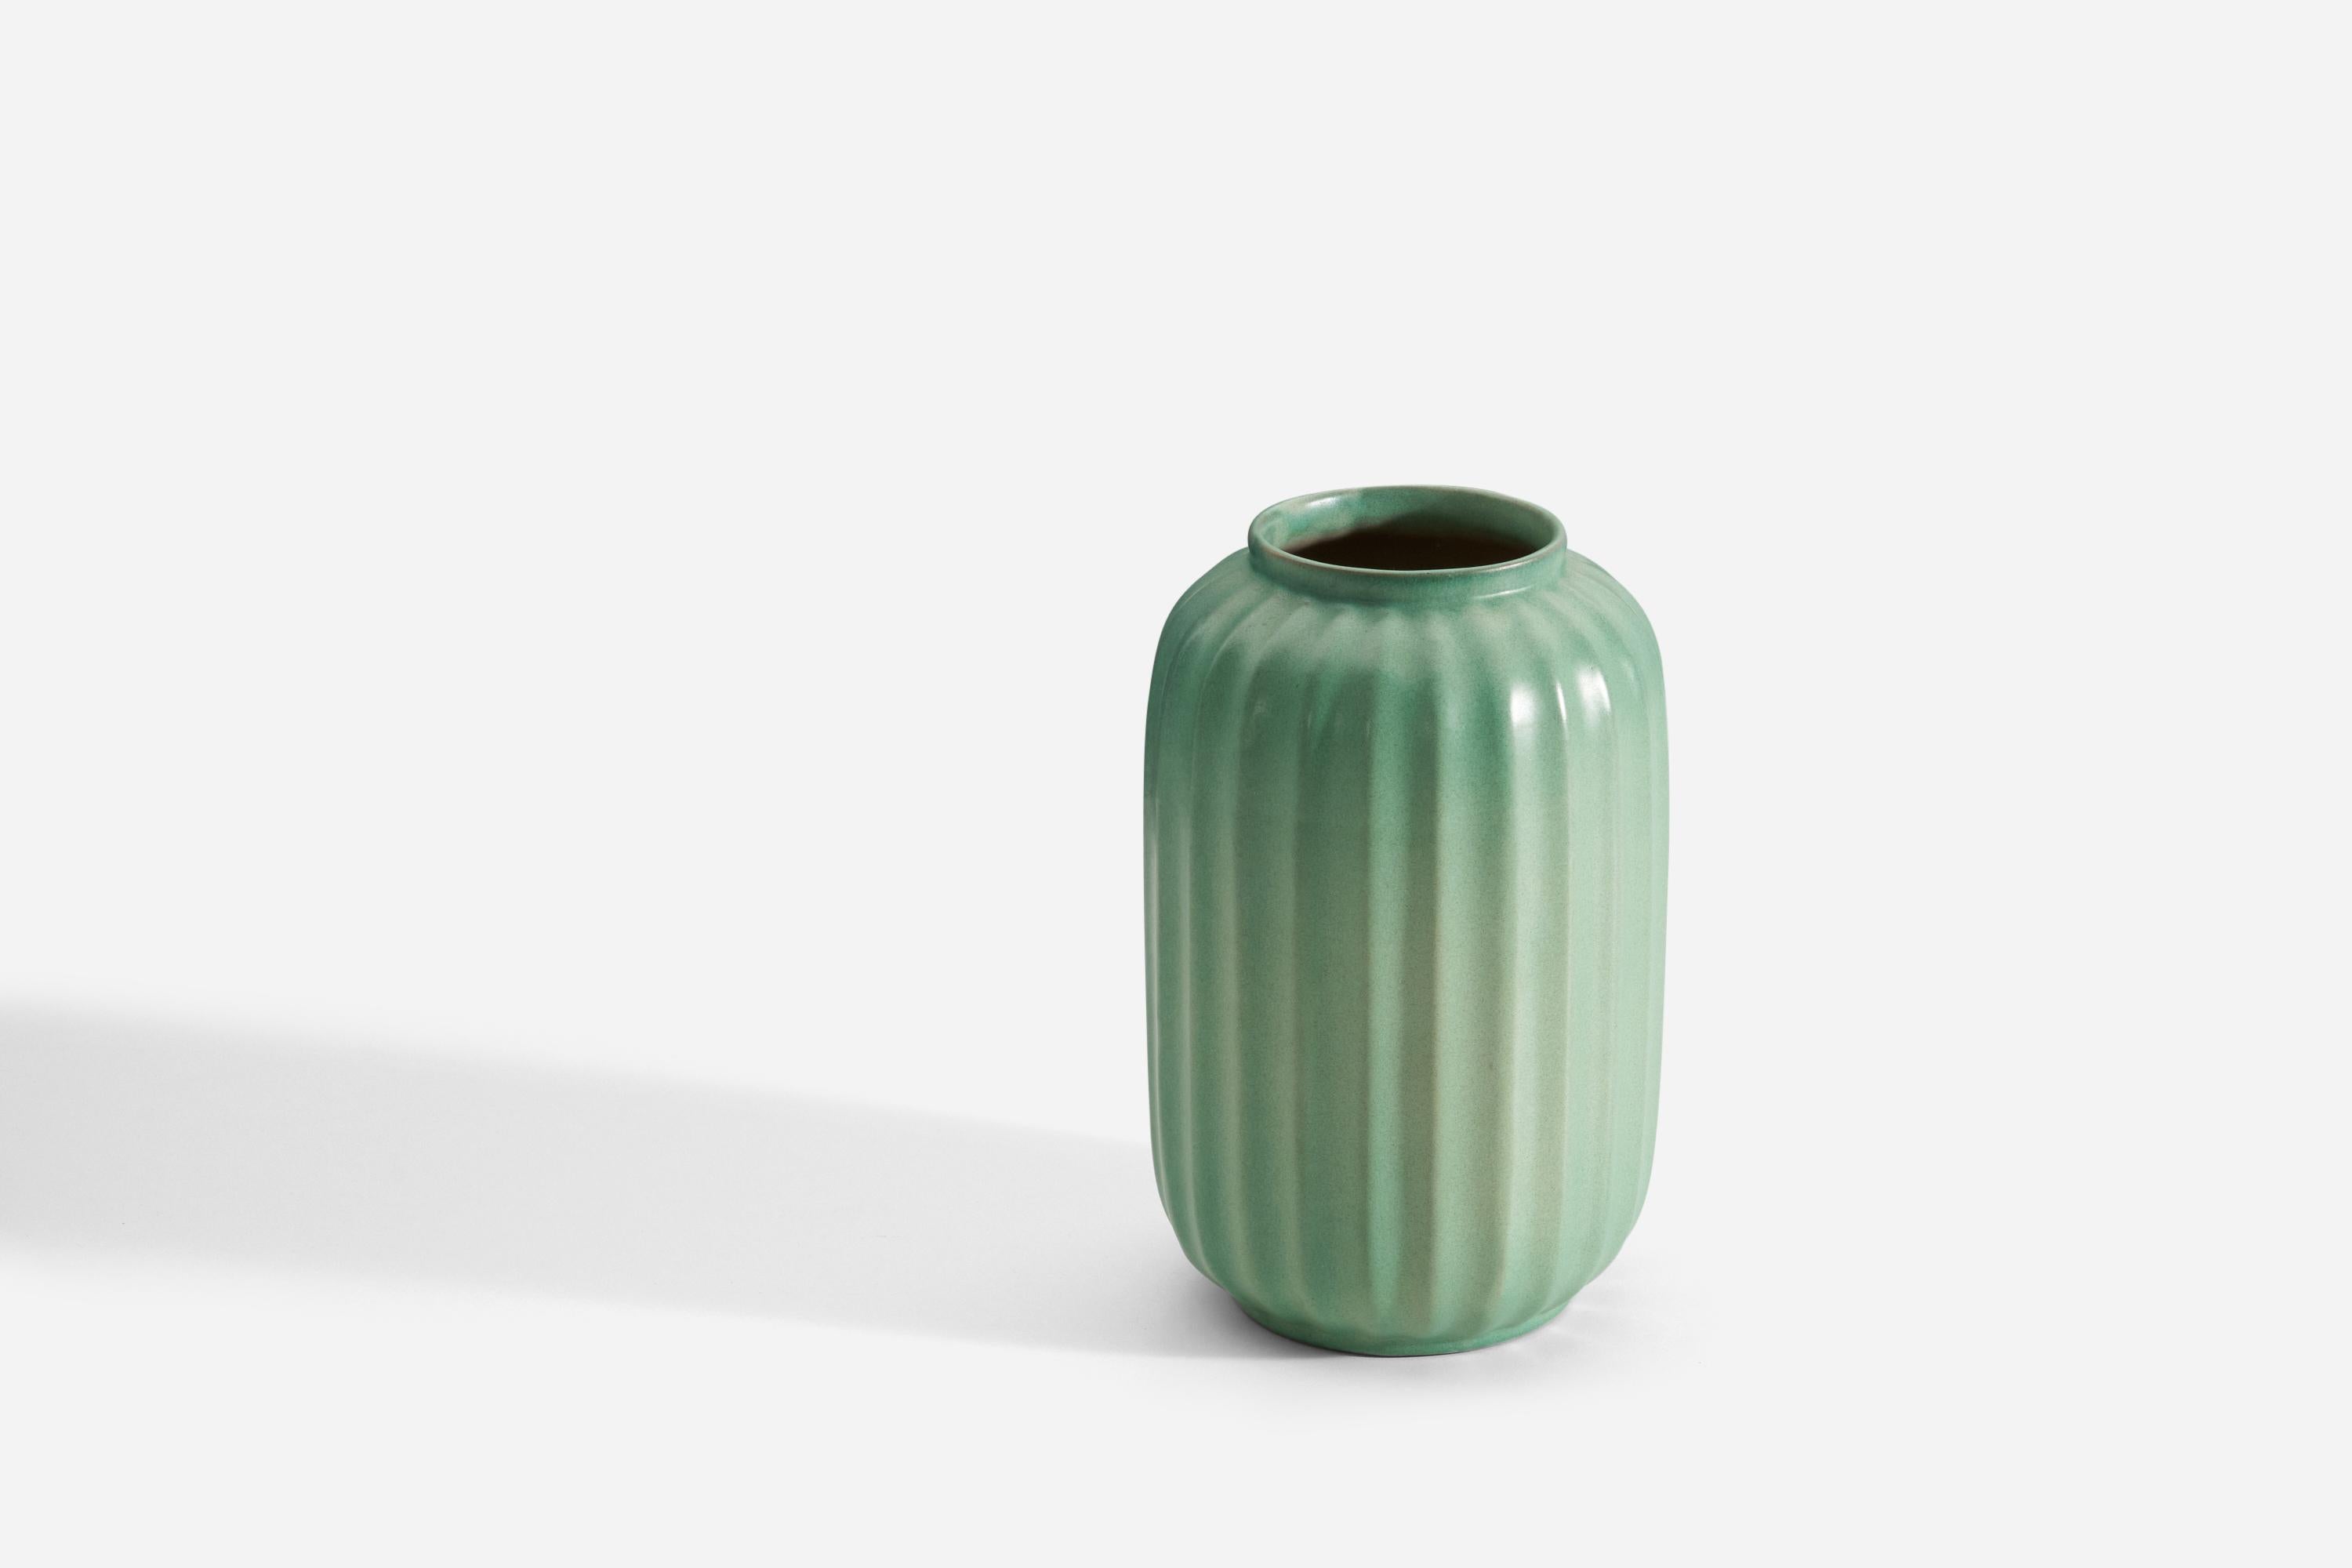 An early modernist vase. Produced by Upsala-Ekeby, Sweden, 1940s. Earthenware. 

Other designers of the period include Ettore Sottsass, Carl Harry Stålhane, Lisa Larsson, Axel Salto, and Arne Bang.